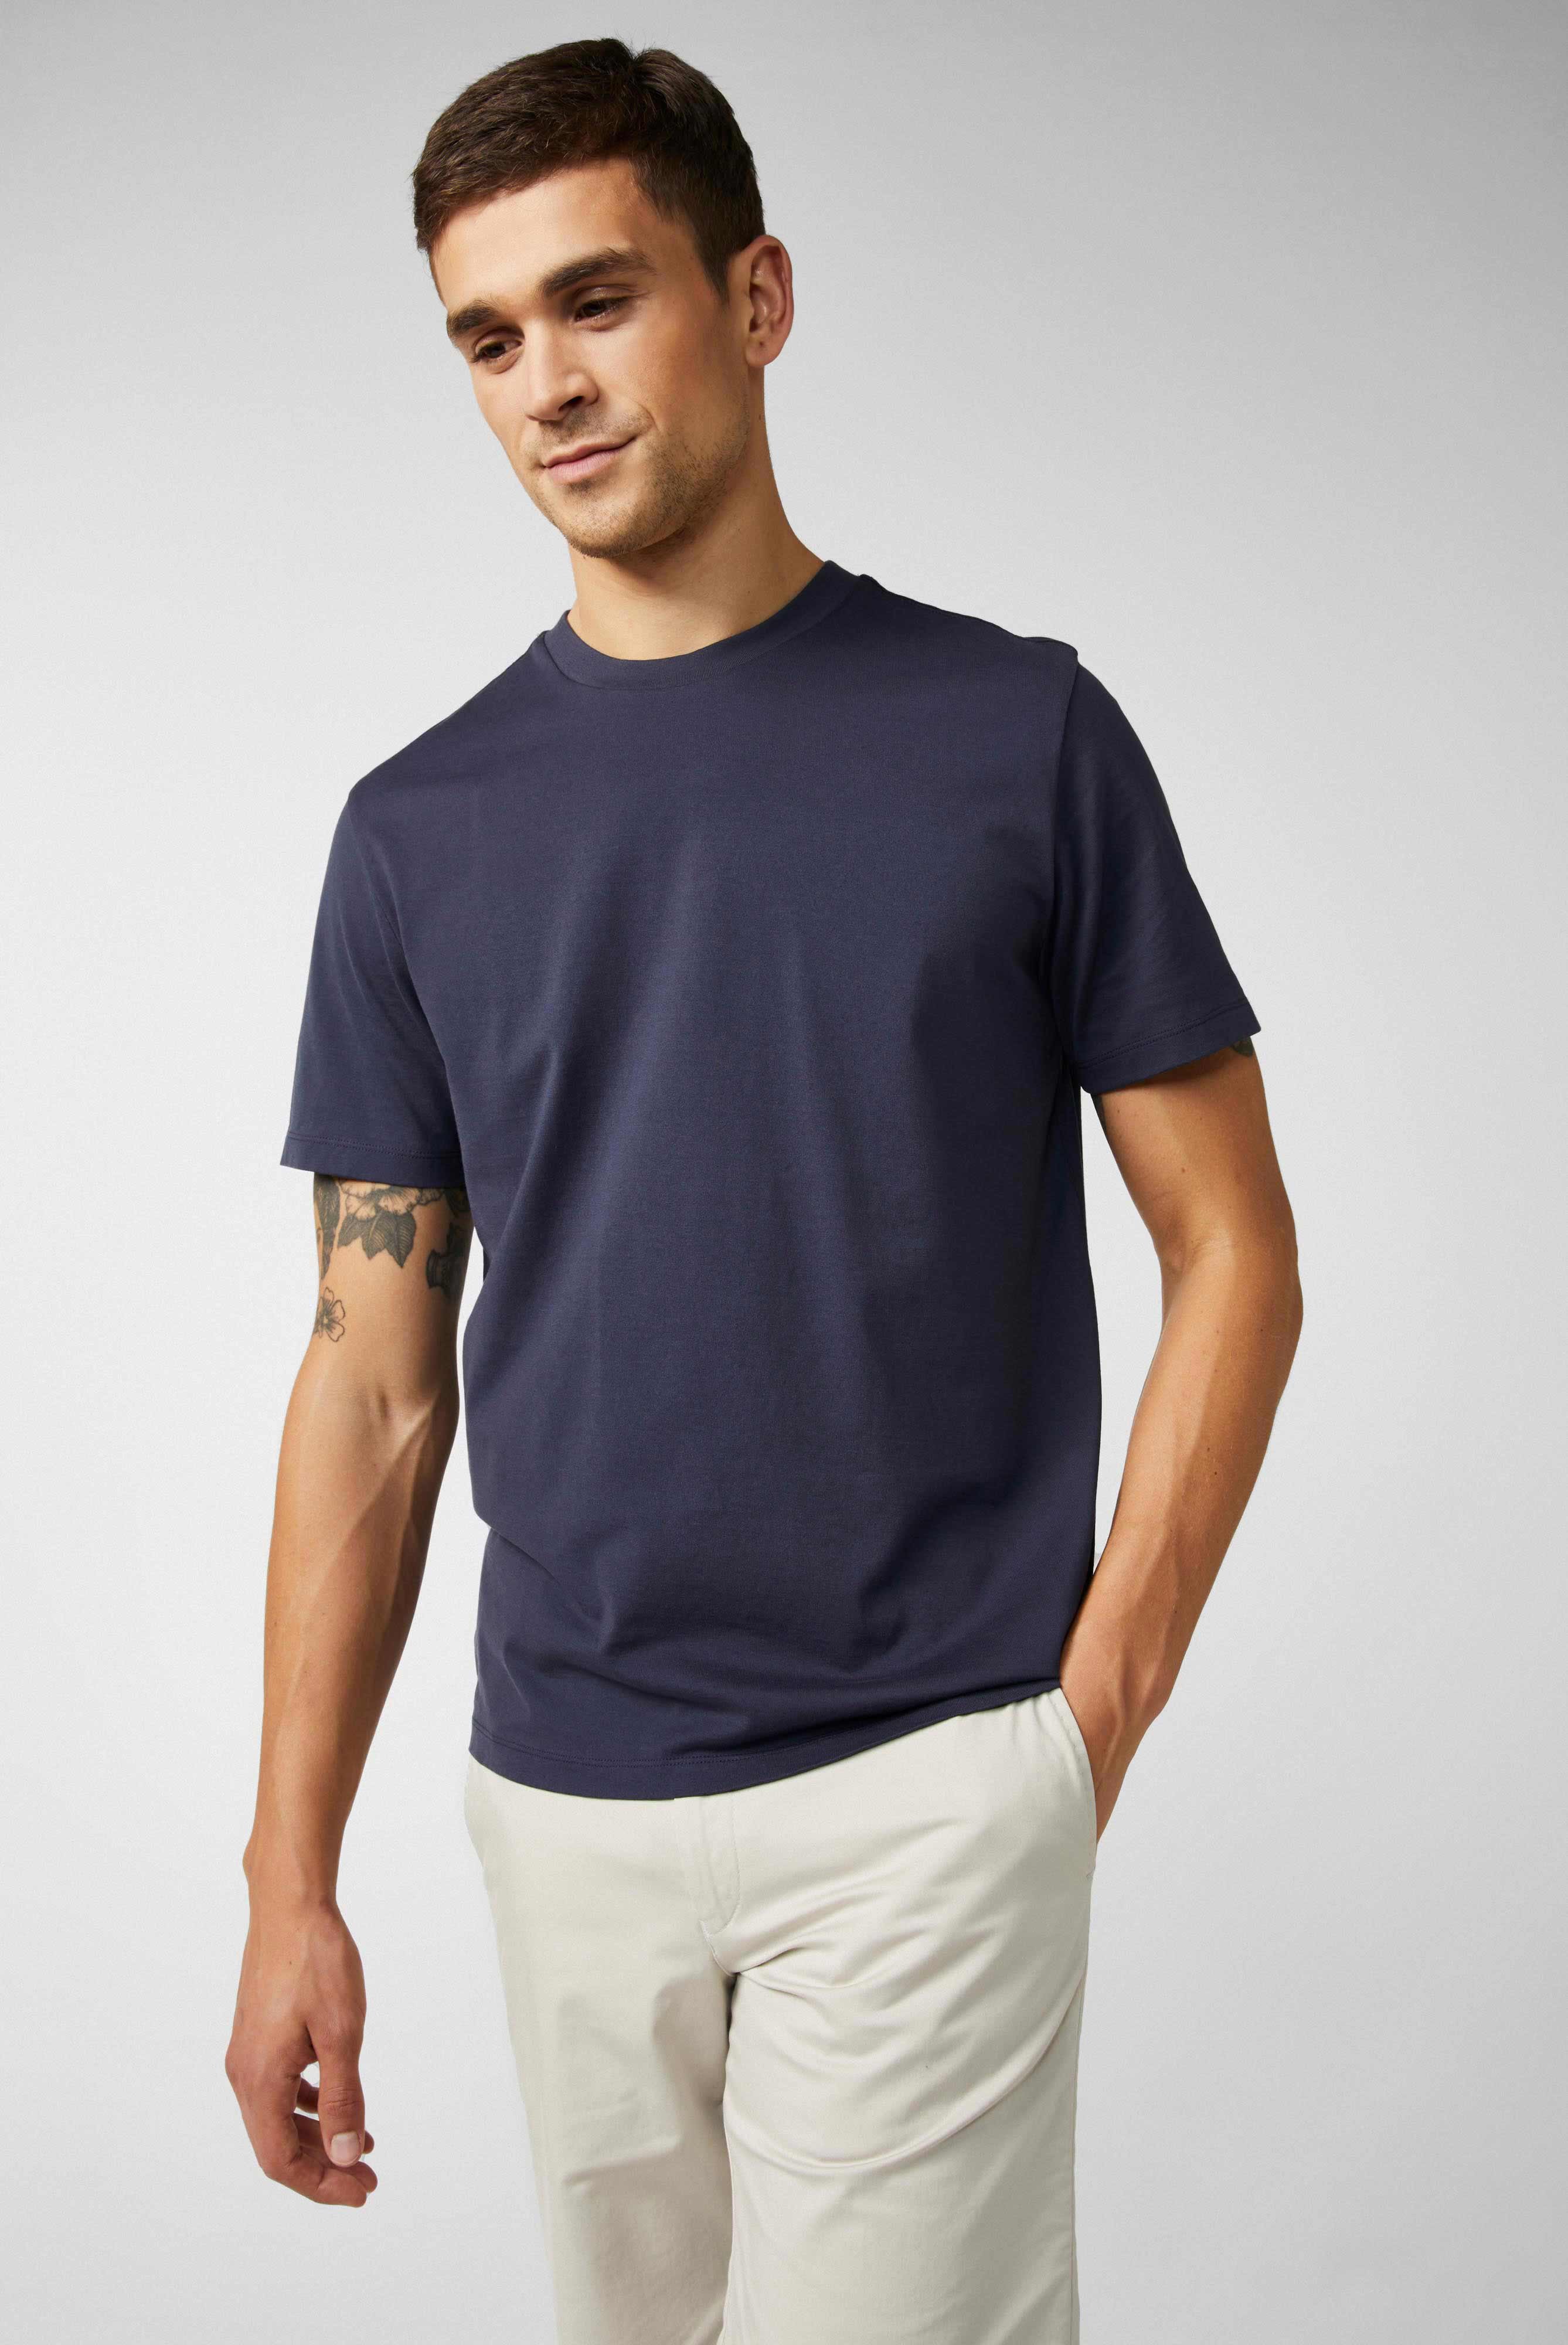 T-Shirts+Relaxed Fit Crew Neck Jersey T-Shirt+20.1660..Z20044.790.S